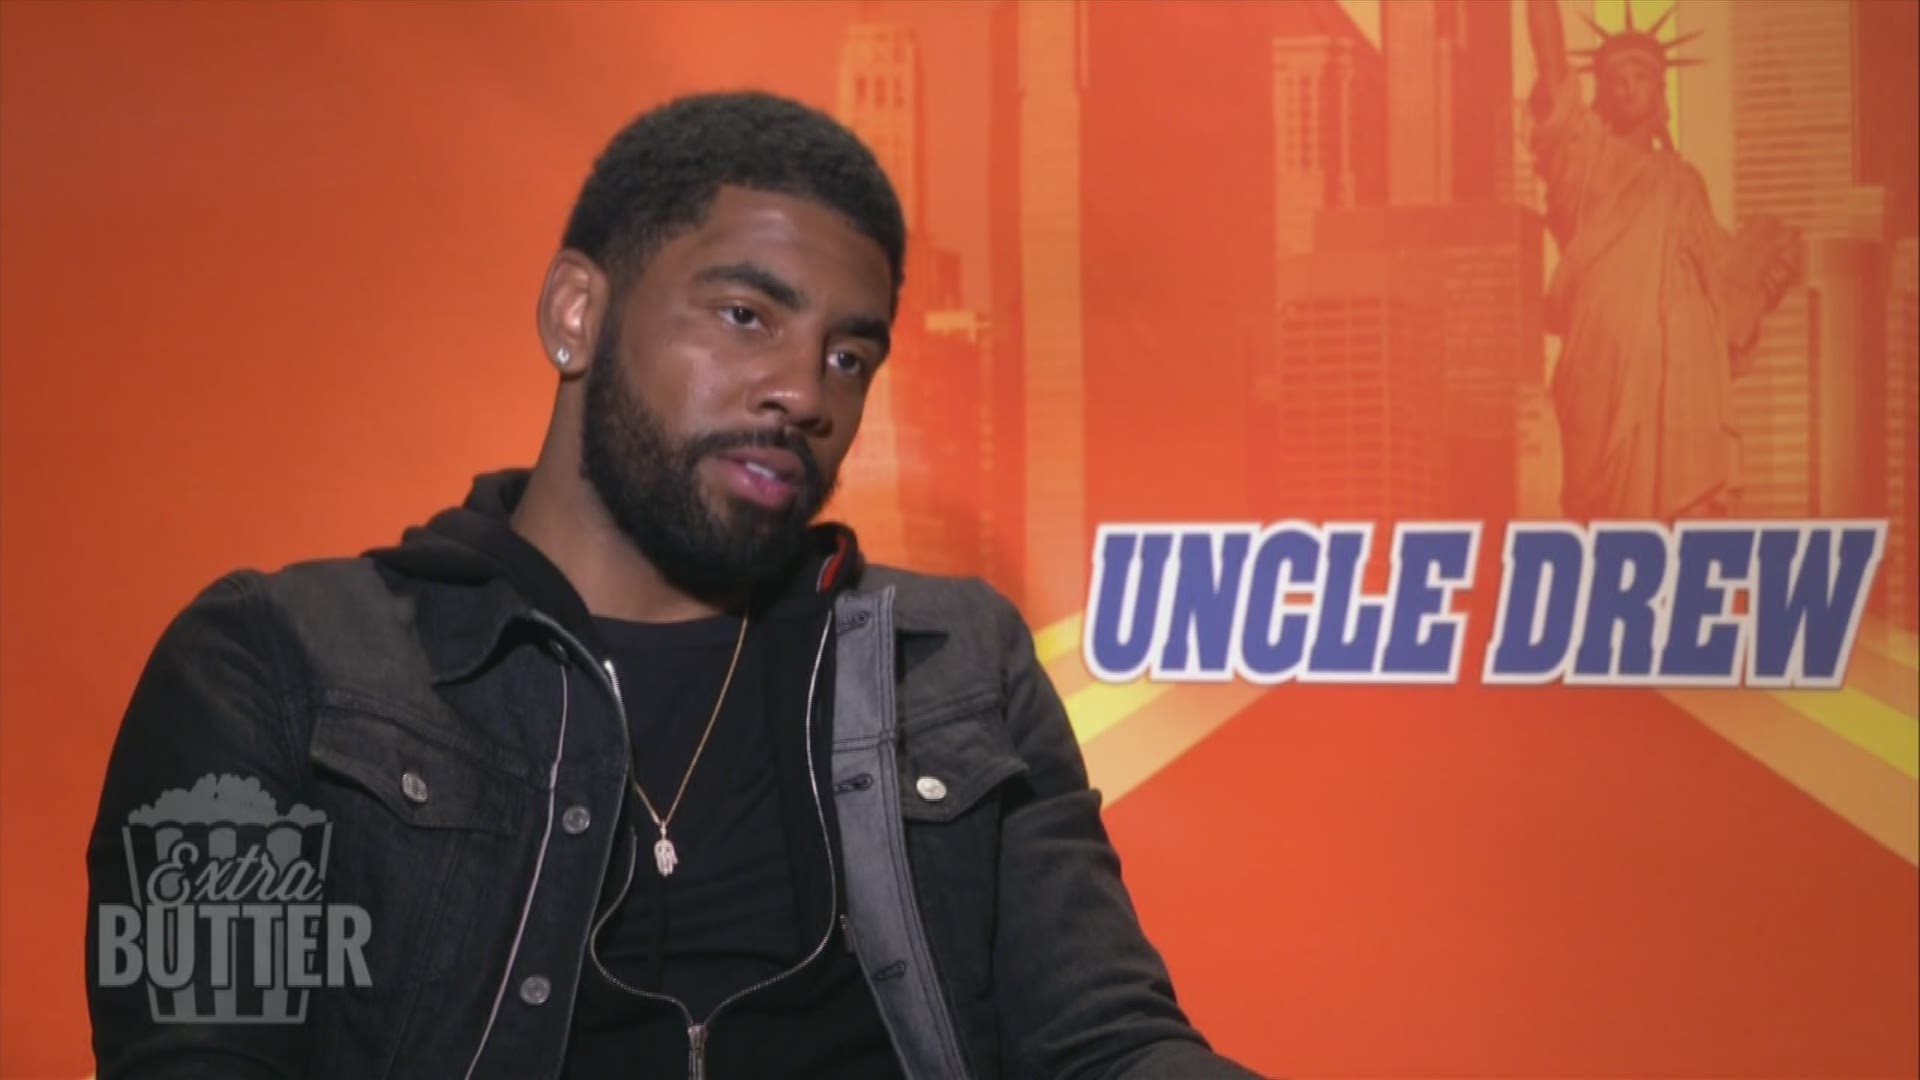 Mark S. Allen talks with the stars of 'Uncle Drew,' including Kyrie Irving, Lisa Leslie and Reggie Miller.